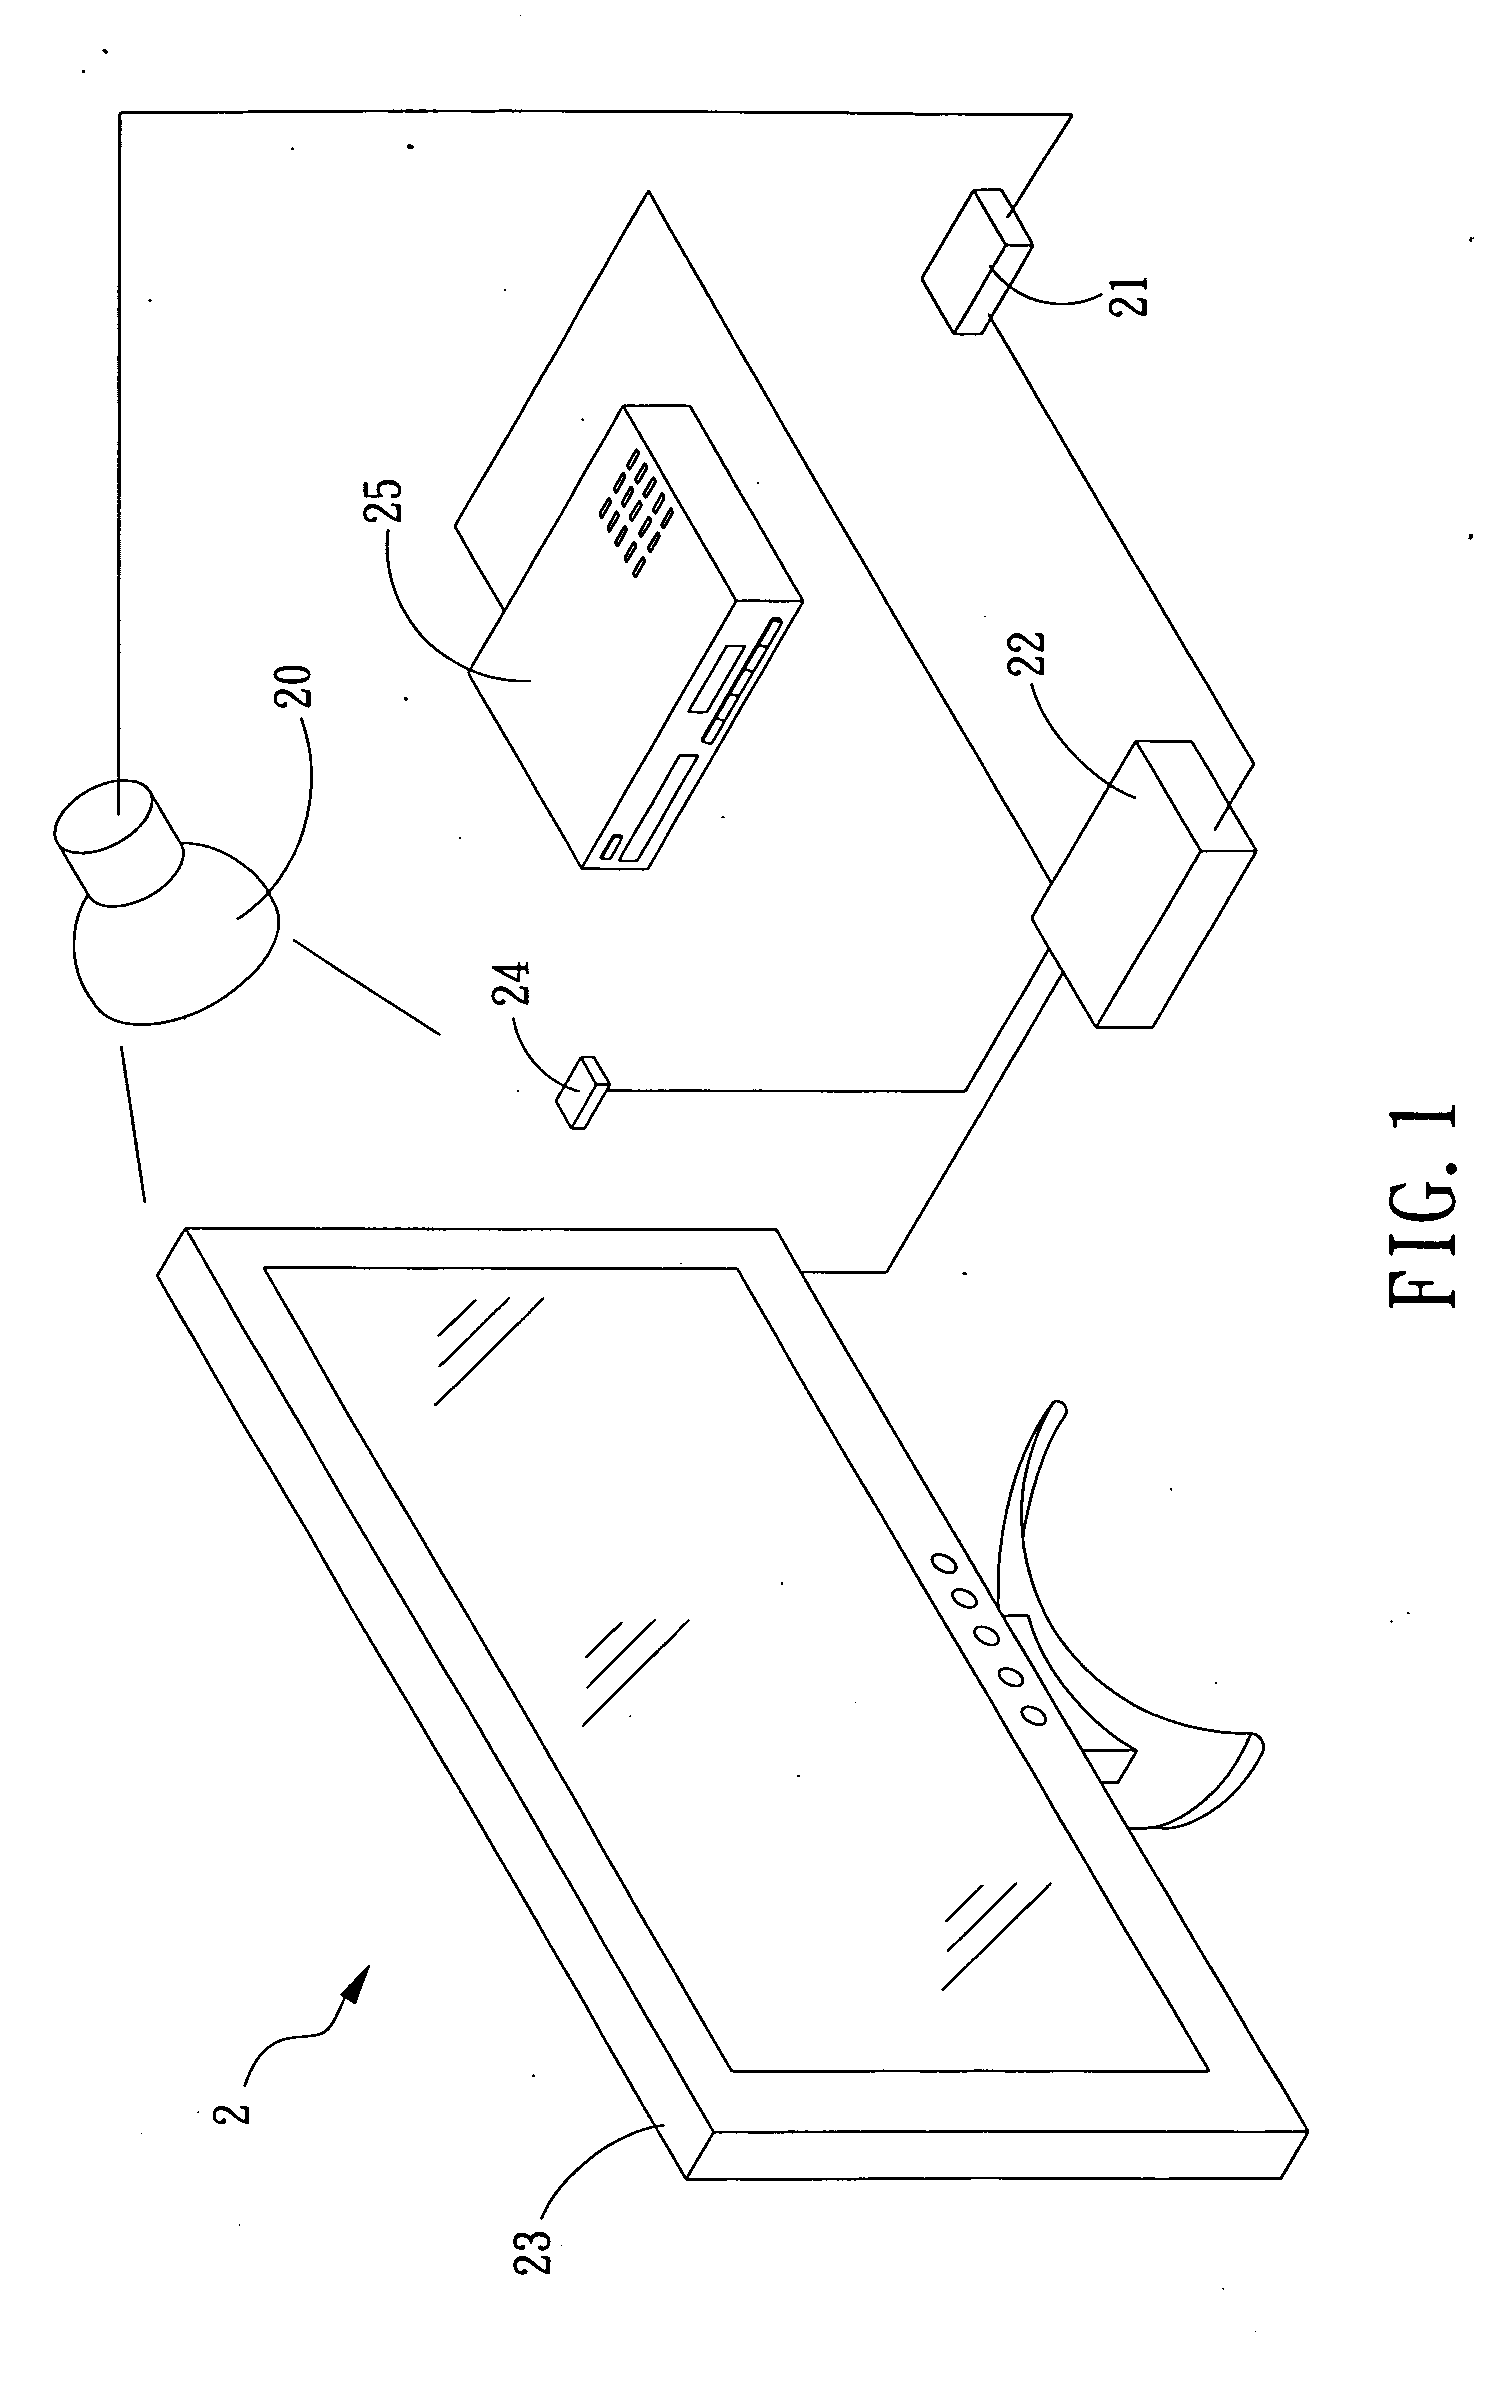 Image processing and controlling system